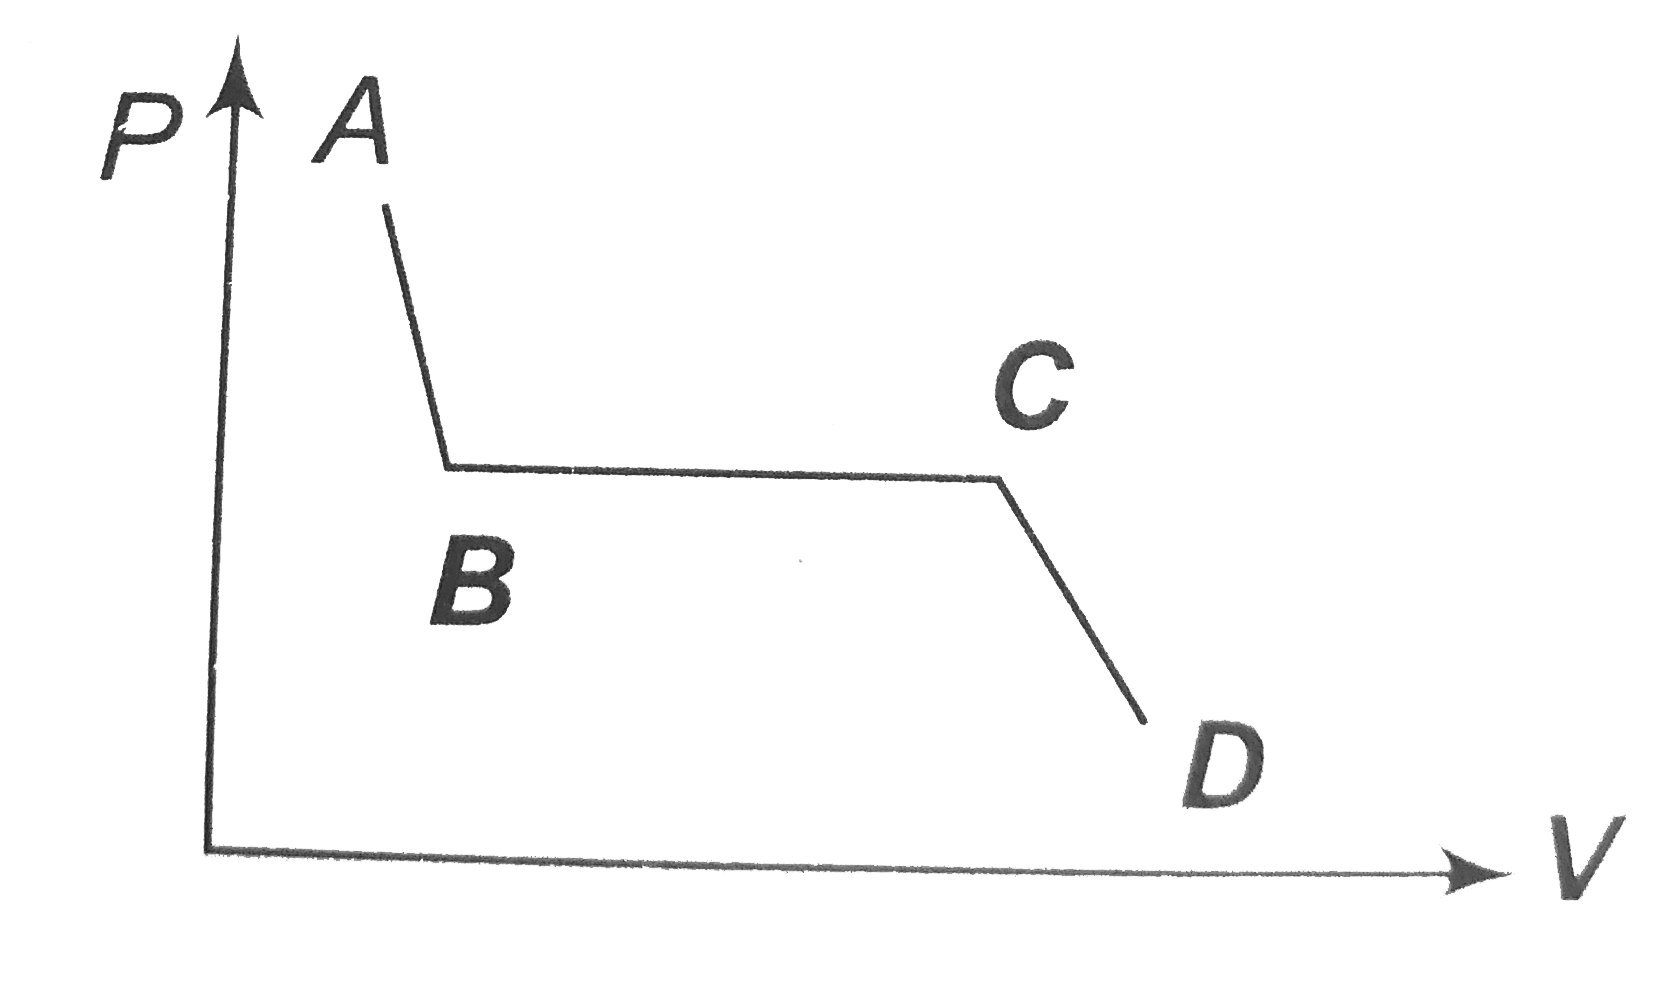 The portion AB of the indicator diagram representing the state of matter denotes